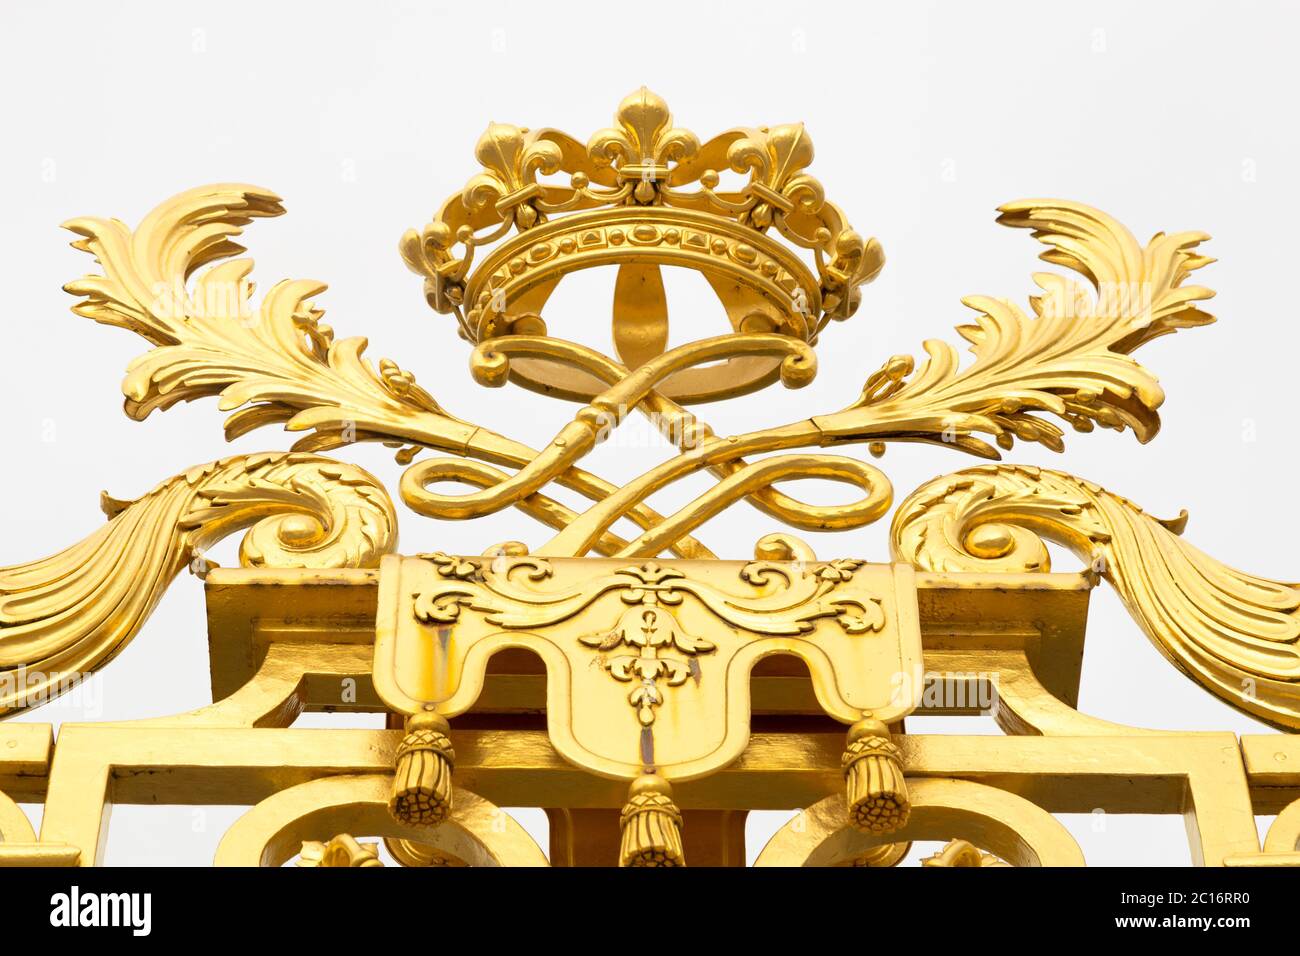 The golden gate of the Palace of Versailles, or Chateau de Versailles, or simply Versailles, in France Stock Photo